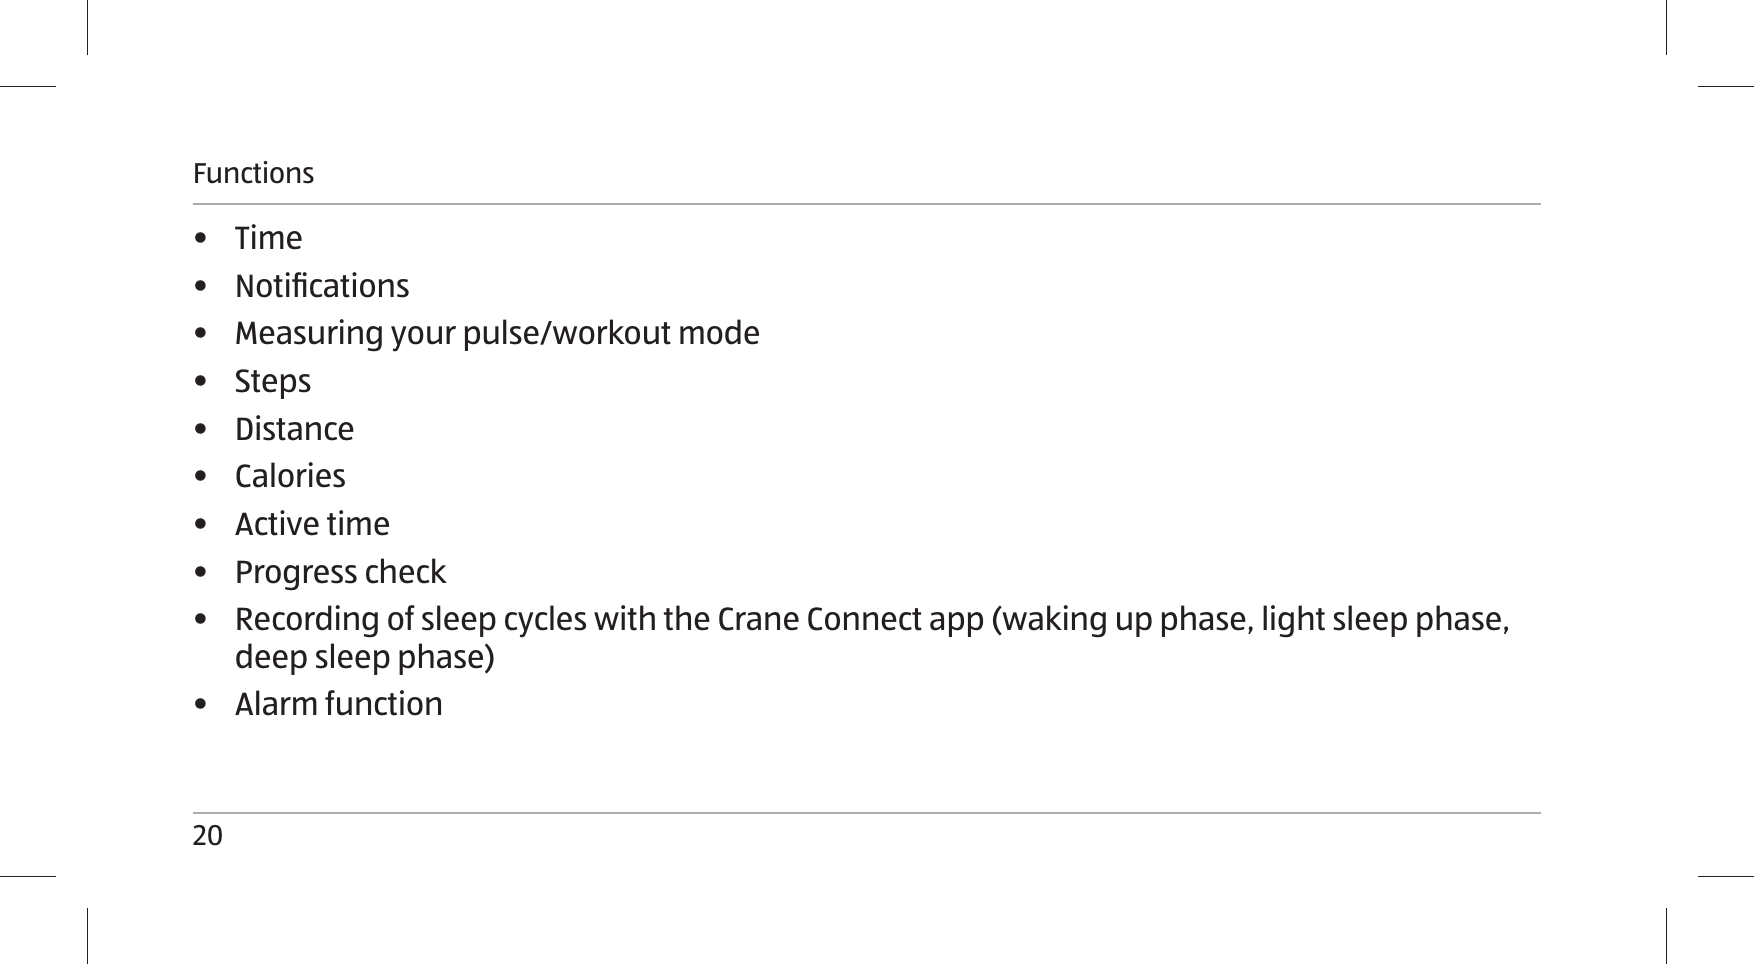 Functions20•  Time•  Notiﬁcations•  Measuring your pulse/workout mode•  Steps •  Distance•  Calories•  Active time•  Progress check•  Recording of sleep cycles with the Crane Connect app (waking up phase, light sleep phase, deep sleep phase)•  Alarm function